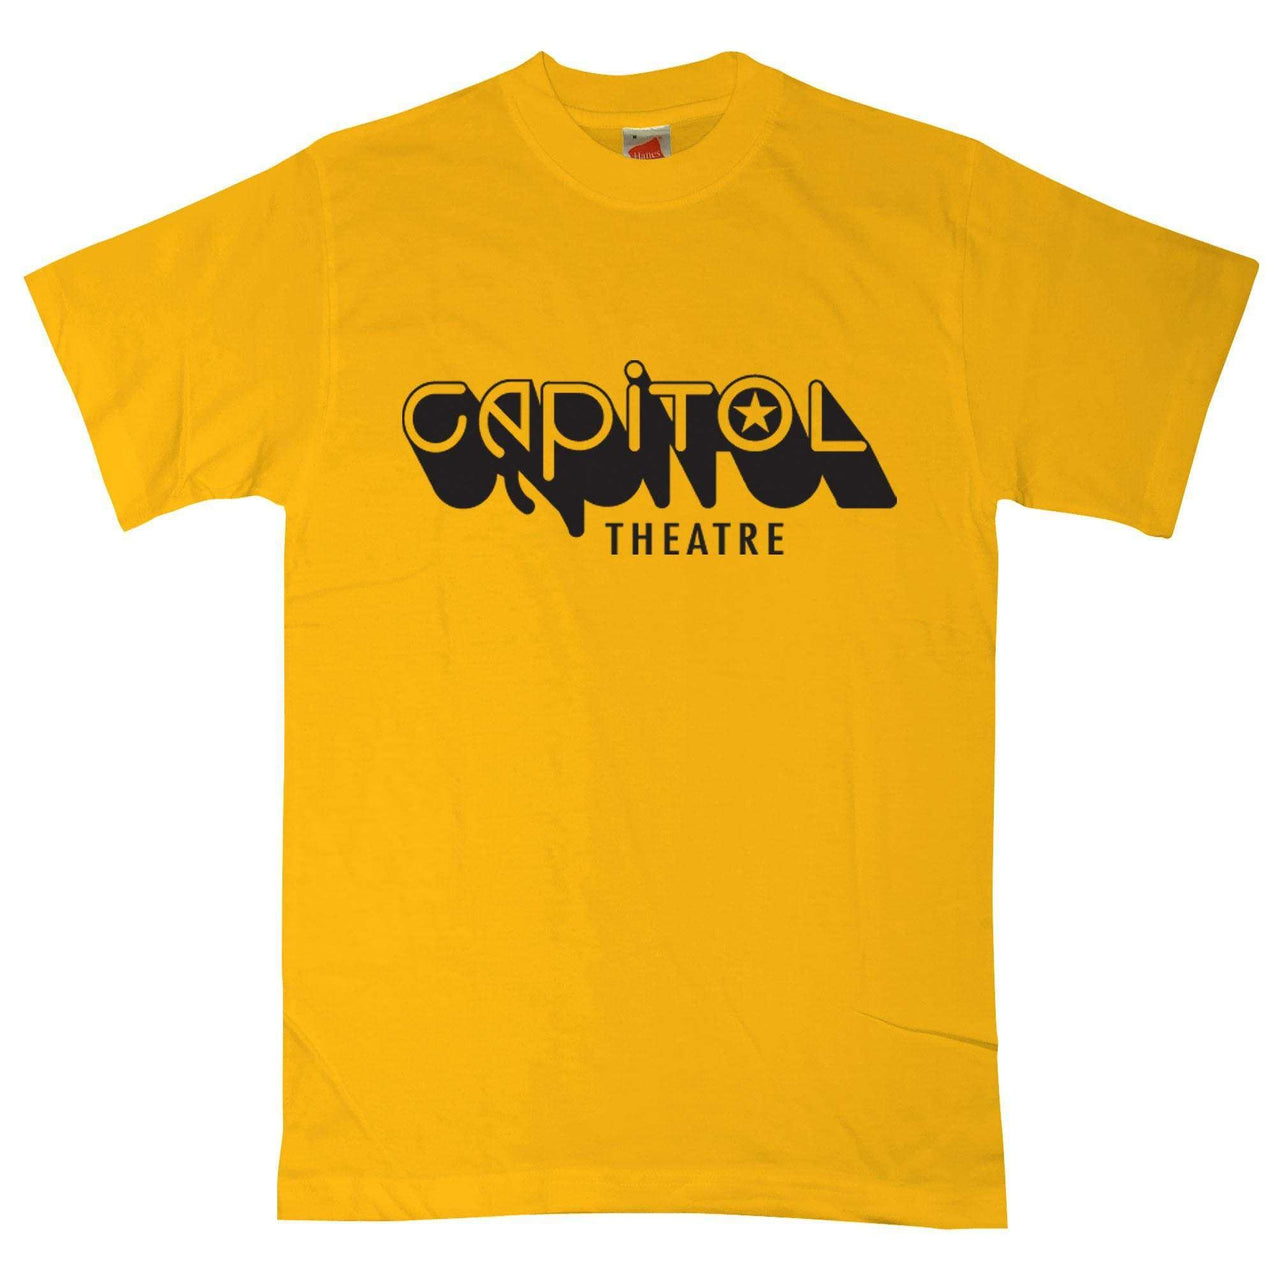 Capitol Theatre Unisex T-Shirt As Worn By Joey Ramone 8Ball